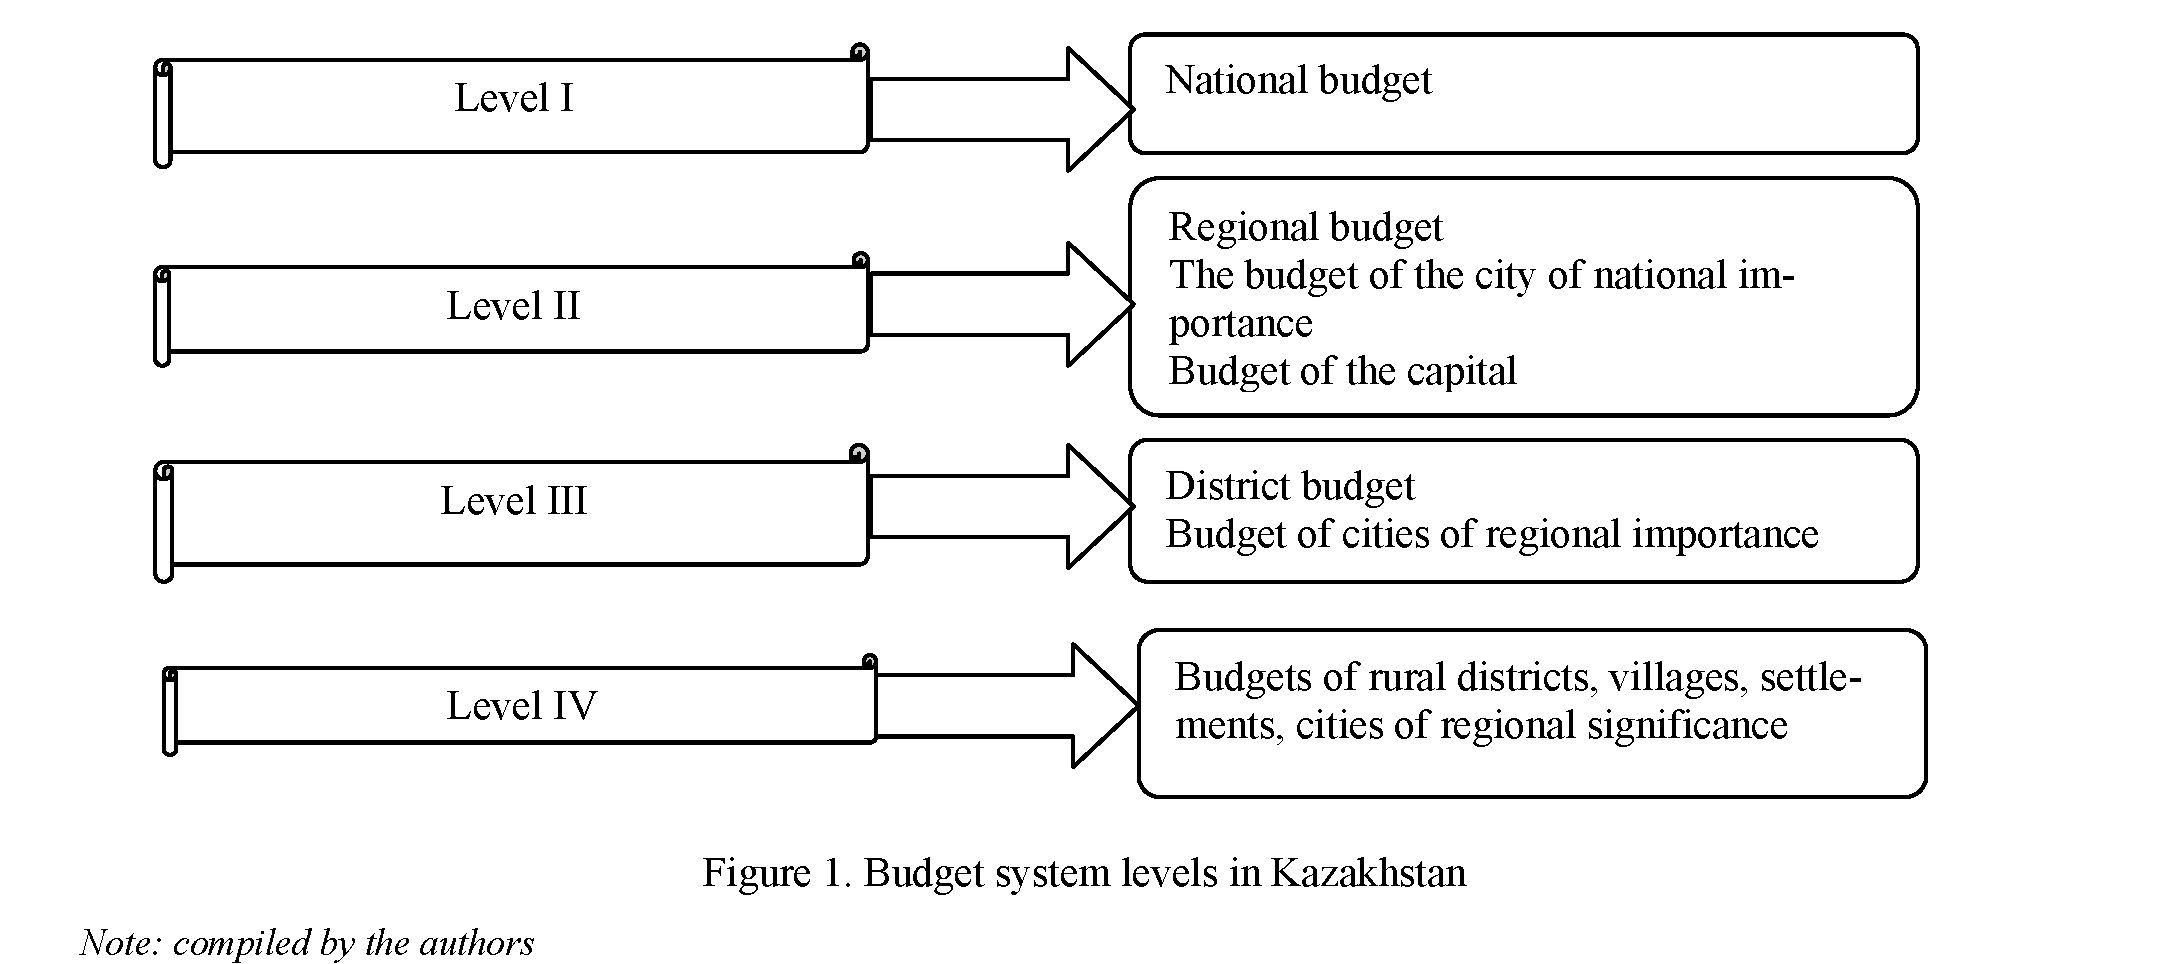 Mechanism for the formation of the local self-government budget and the sources of its income